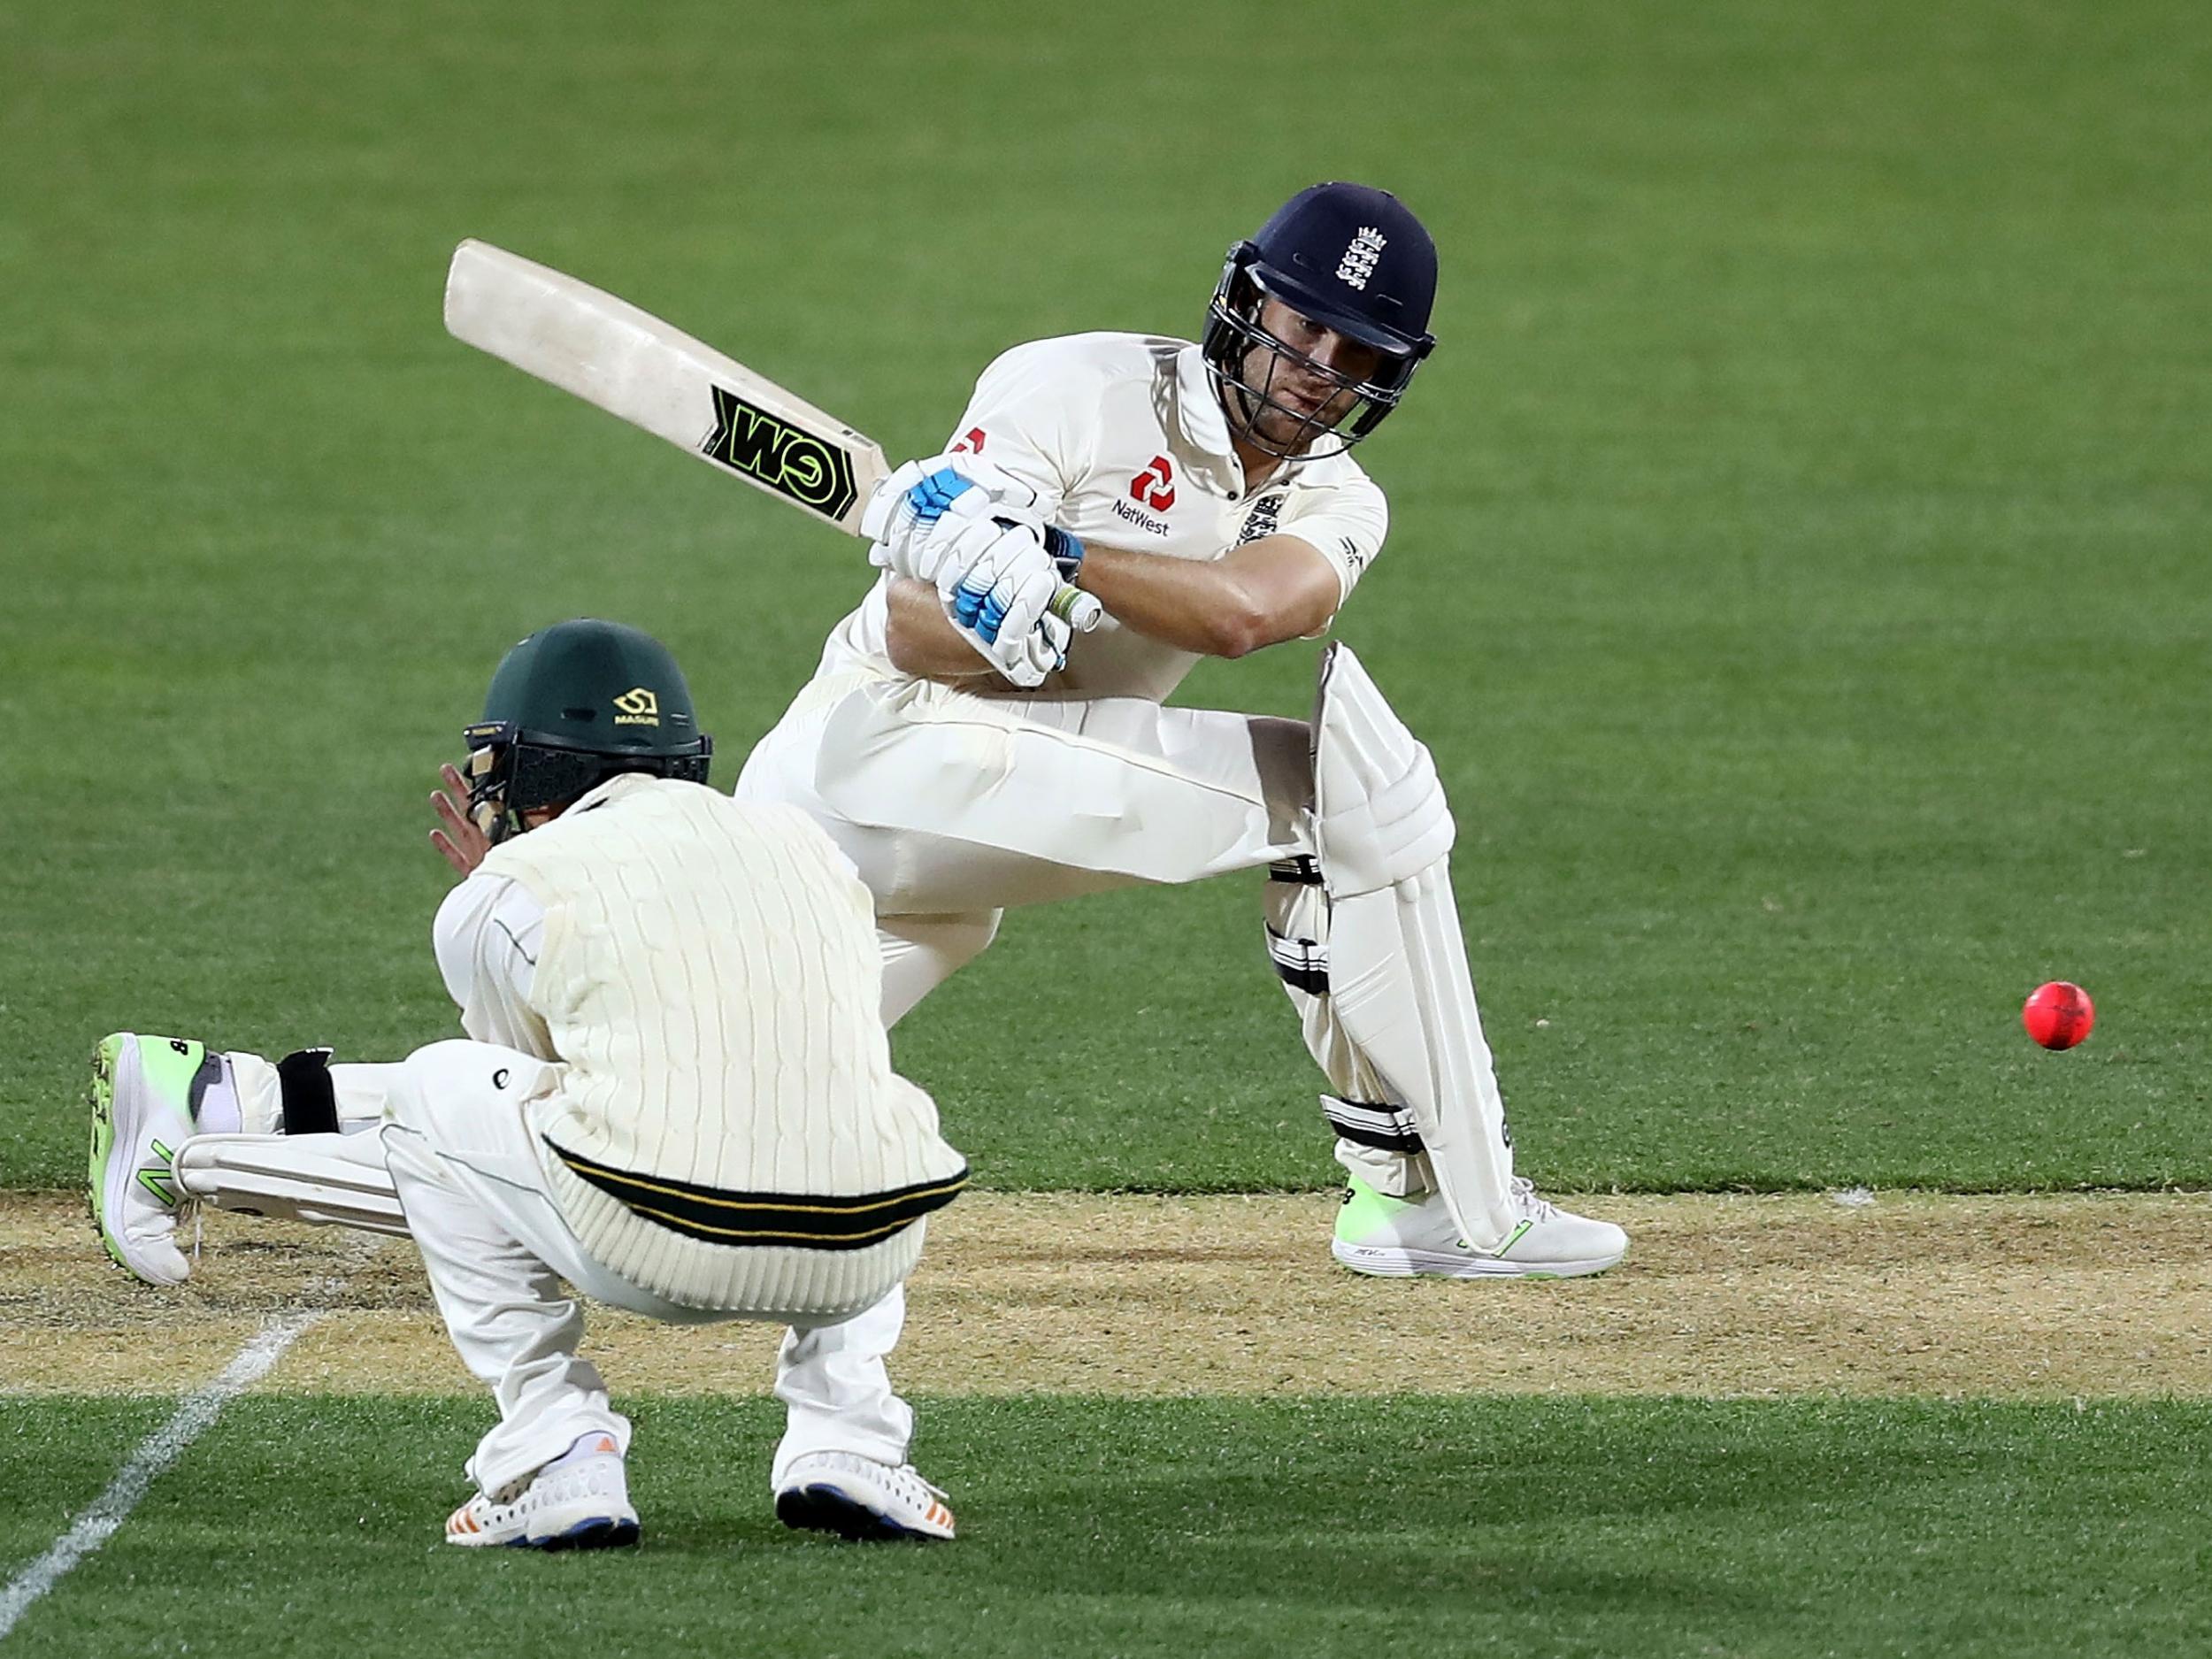 &#13;
Only Malan batted under the lights &#13;